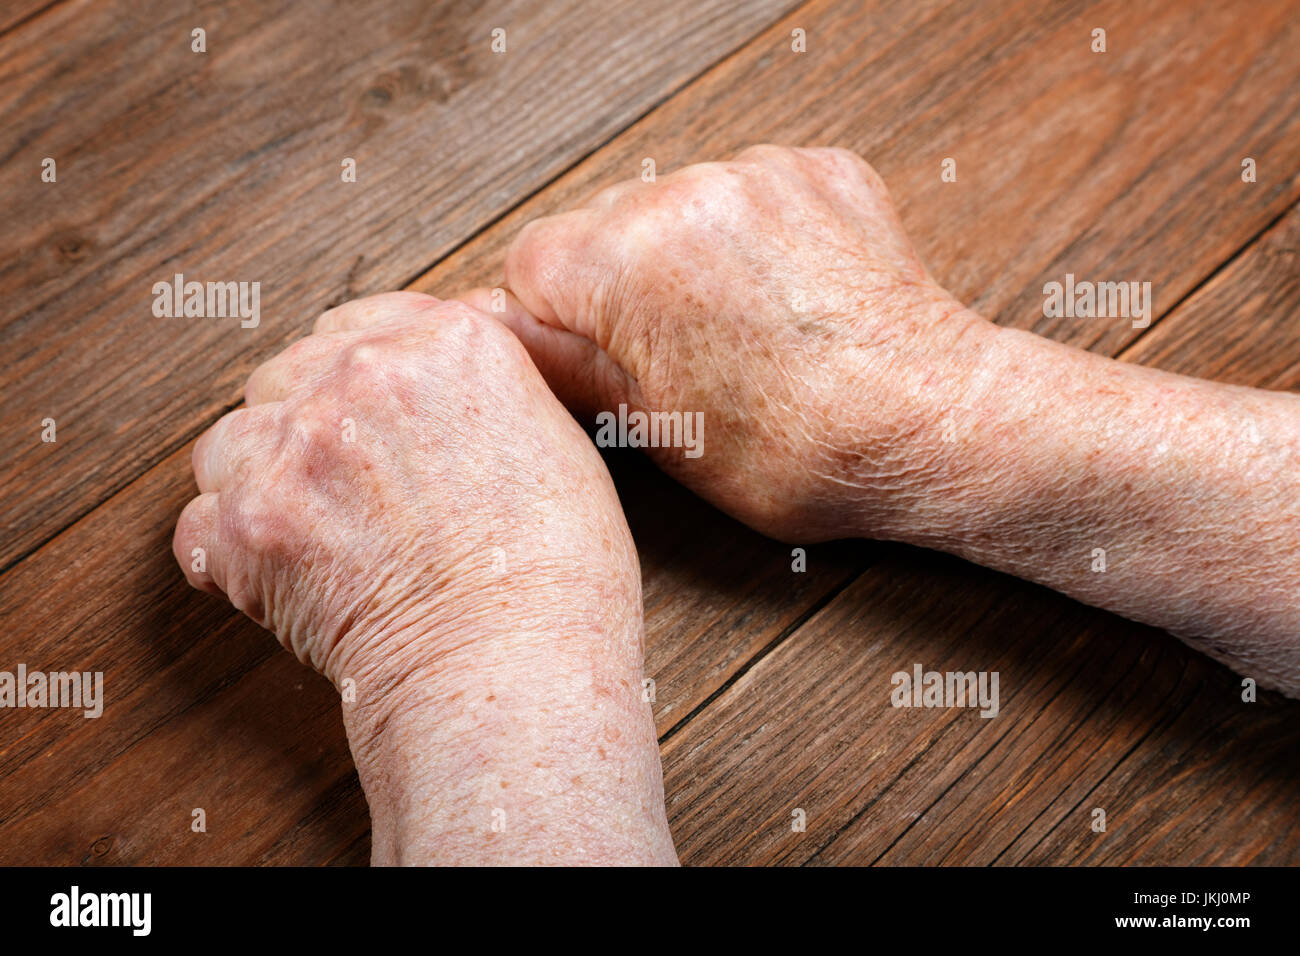 Hands of an old woman close-up on a table Stock Photo